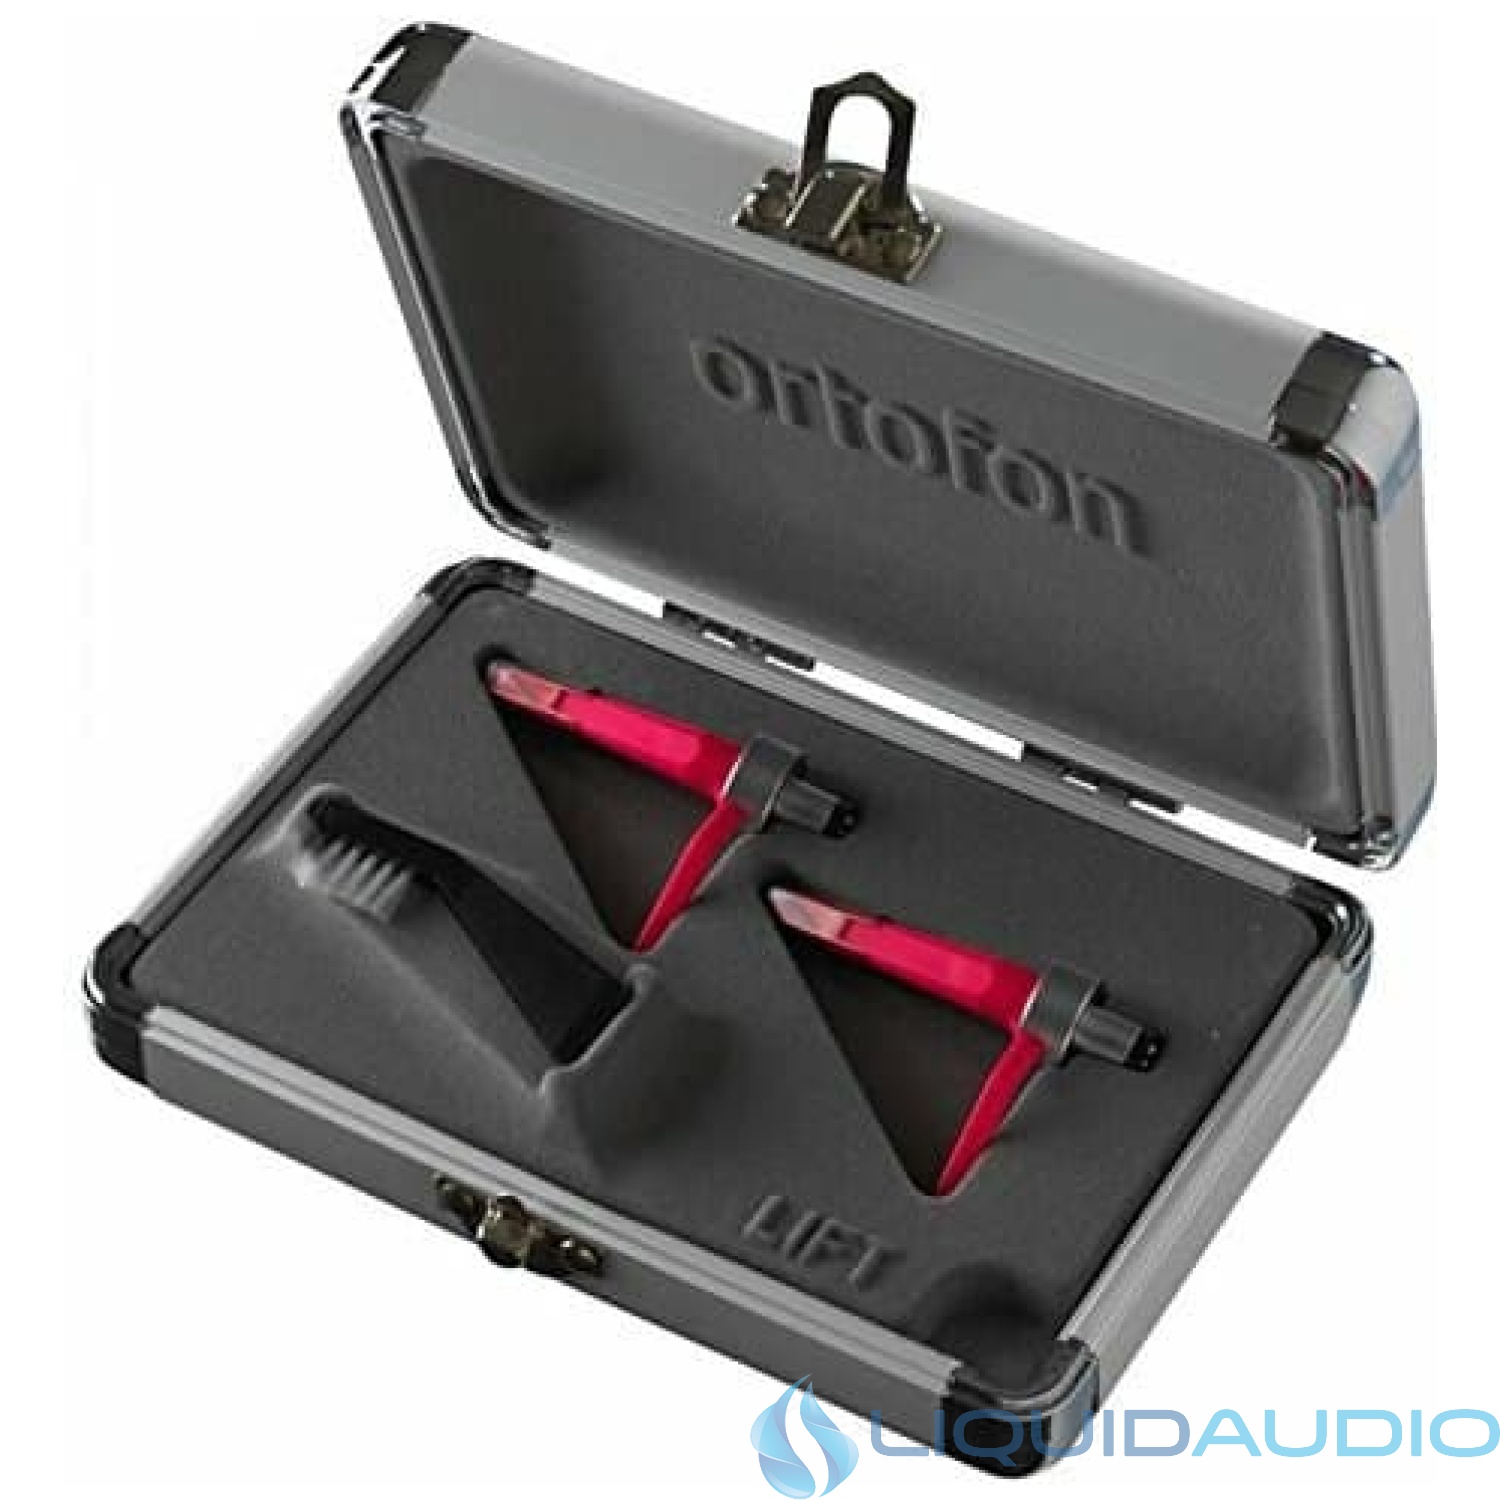 Ortofon Concorde Scratch Twin Pack - 2 x DJ Cartridges each fitted with stylus NEW